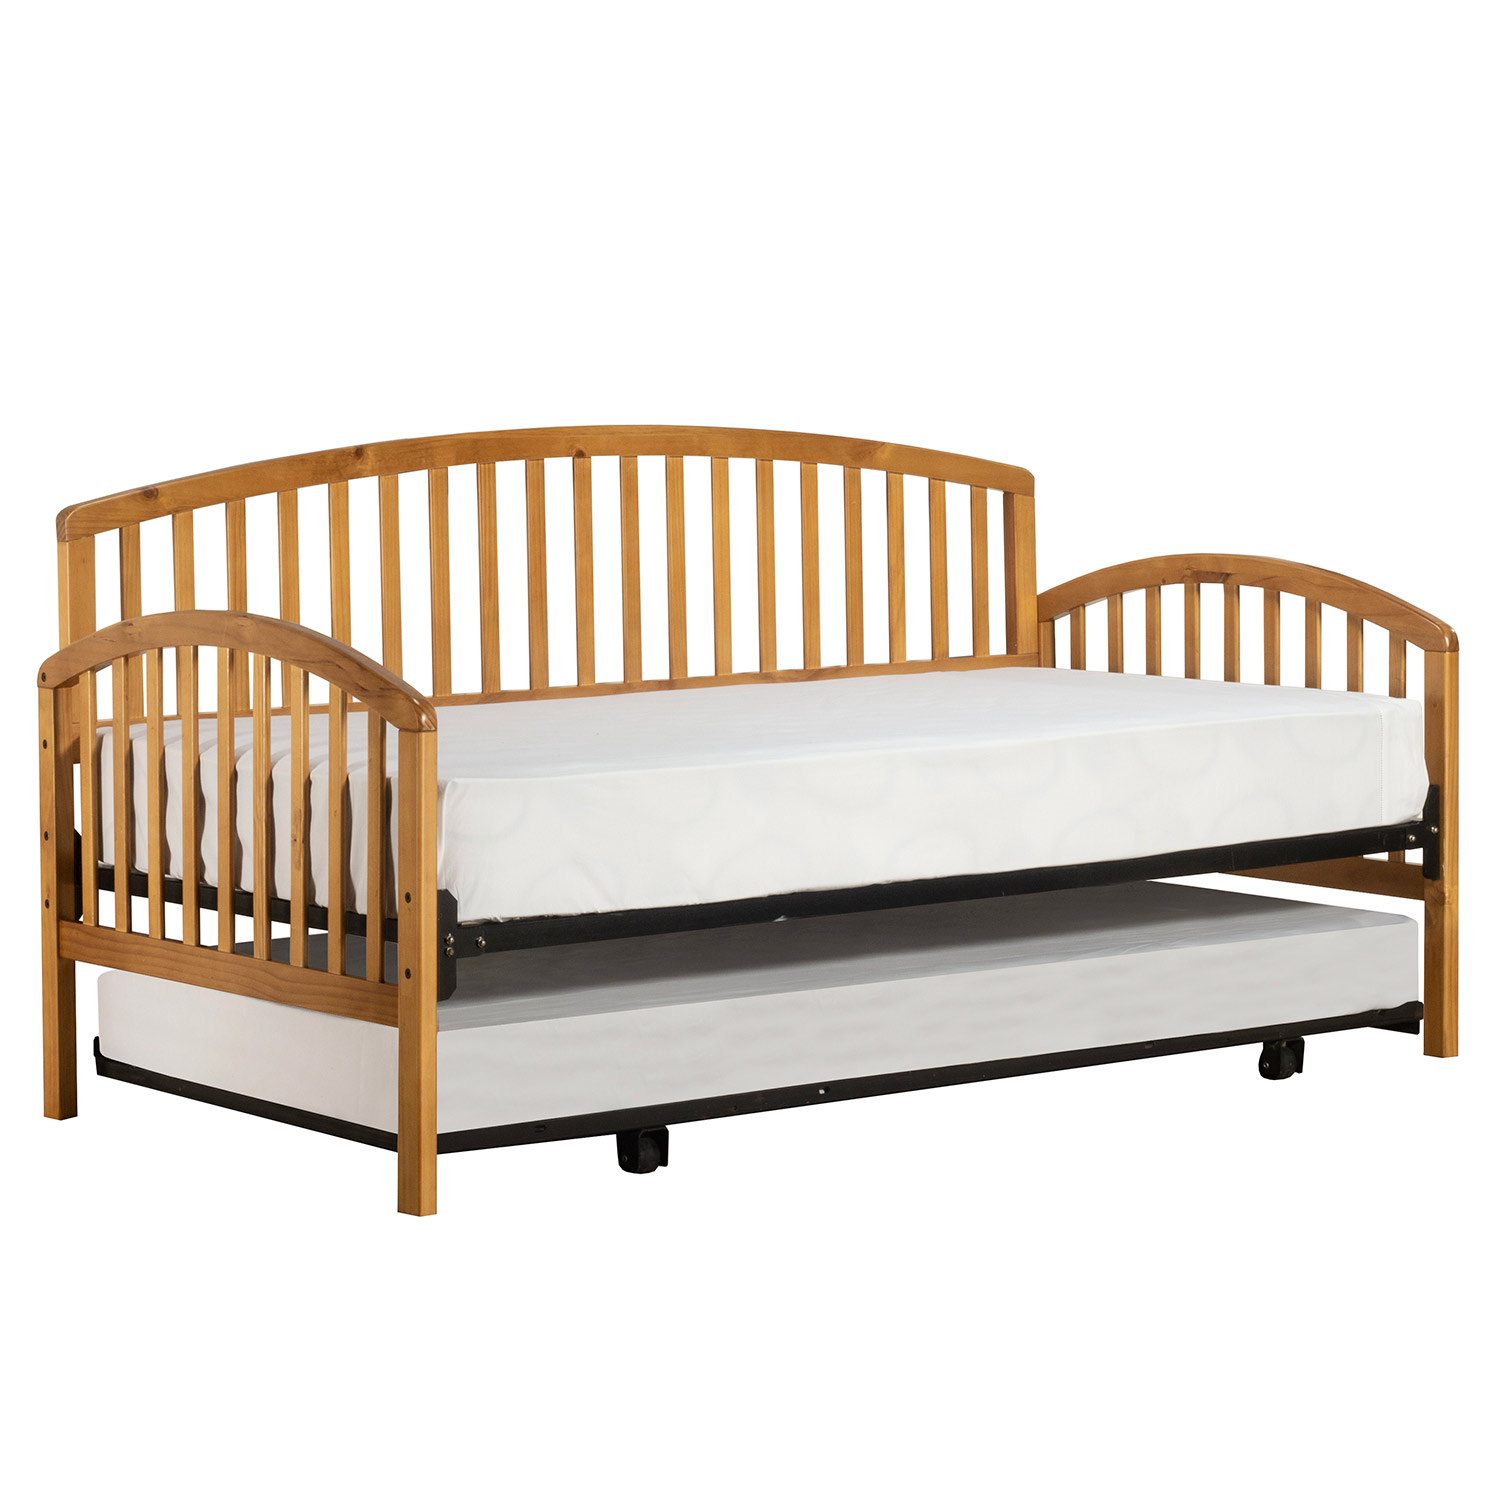 Hillsdale Carolina Daybed with Roll Out Trundle Unit - Country Pine